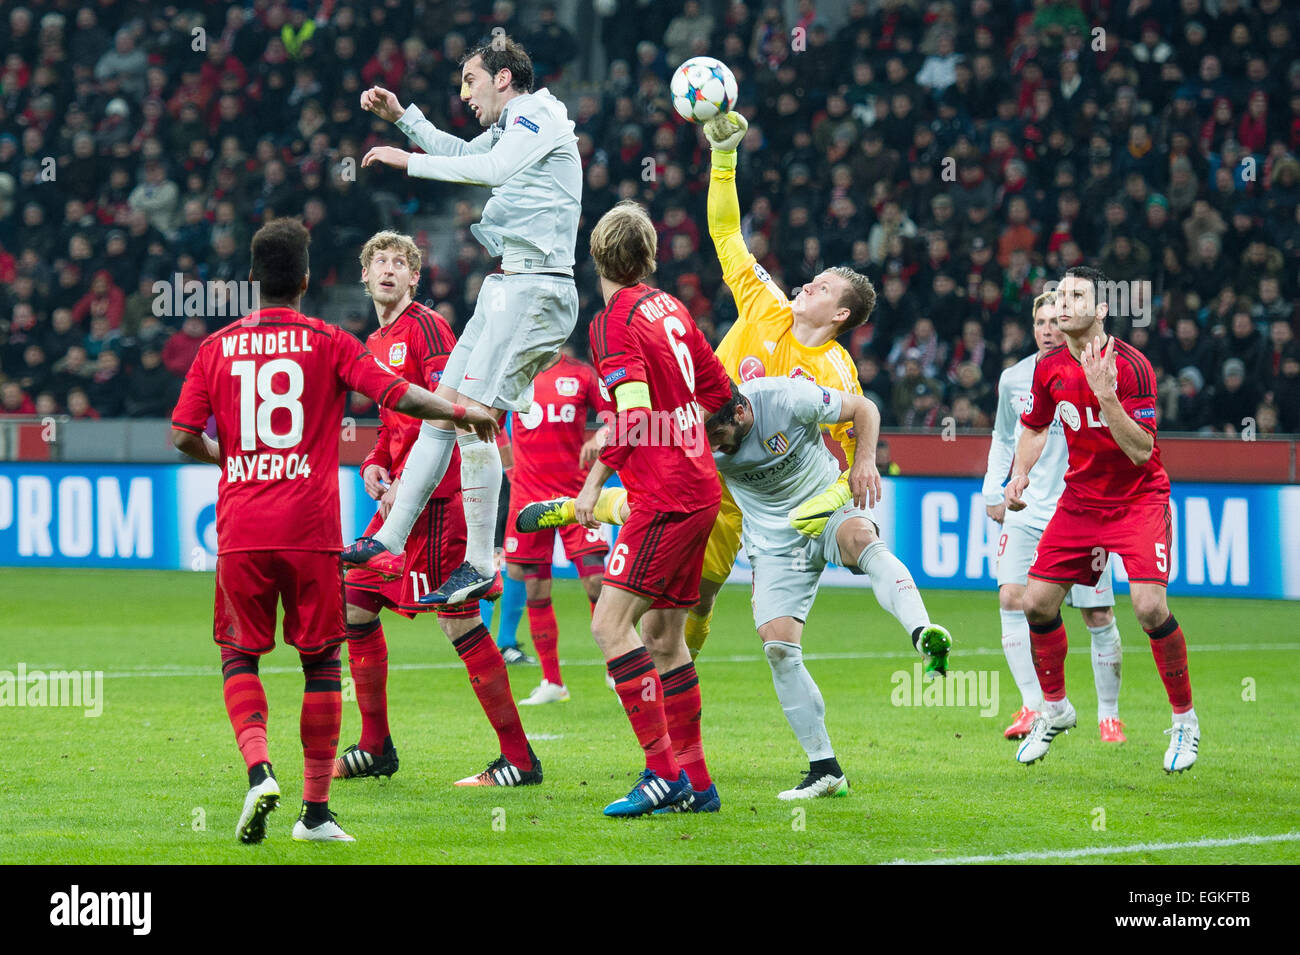 Leverkusen, Germany. 25th Feb, 2015. Leverkusen goalkeeper Bernd Leno competes for the ball with Madrid's Diego Godin during the Champions League round of 16 first leg match between Bayer Leverkusen and Atletico Madrid in Leverkusen, Germany, 25 February 2015. Photo: Maja Hitij/dpa/Alamy Live News Stock Photo